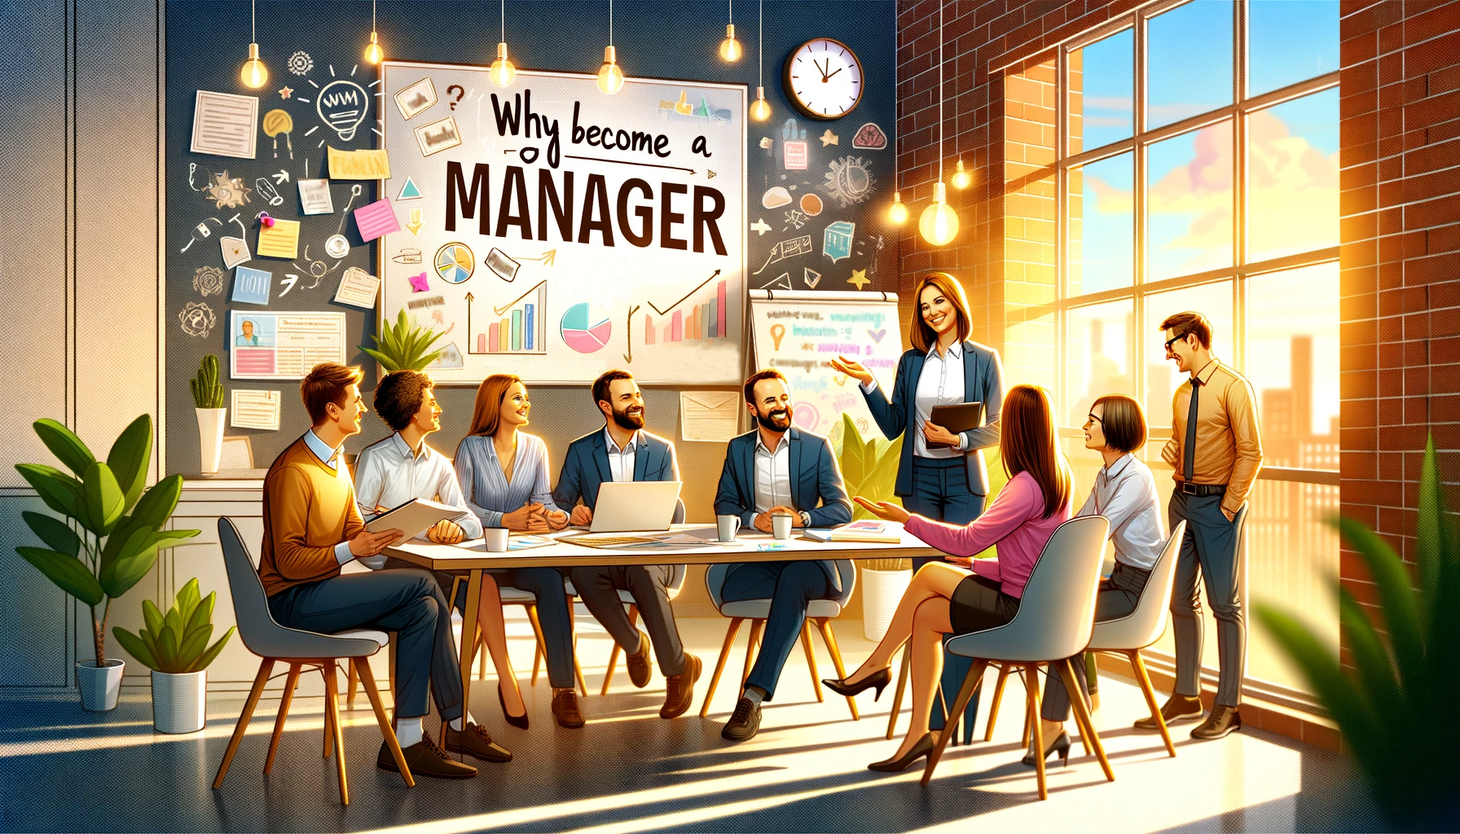 Why become a manager?